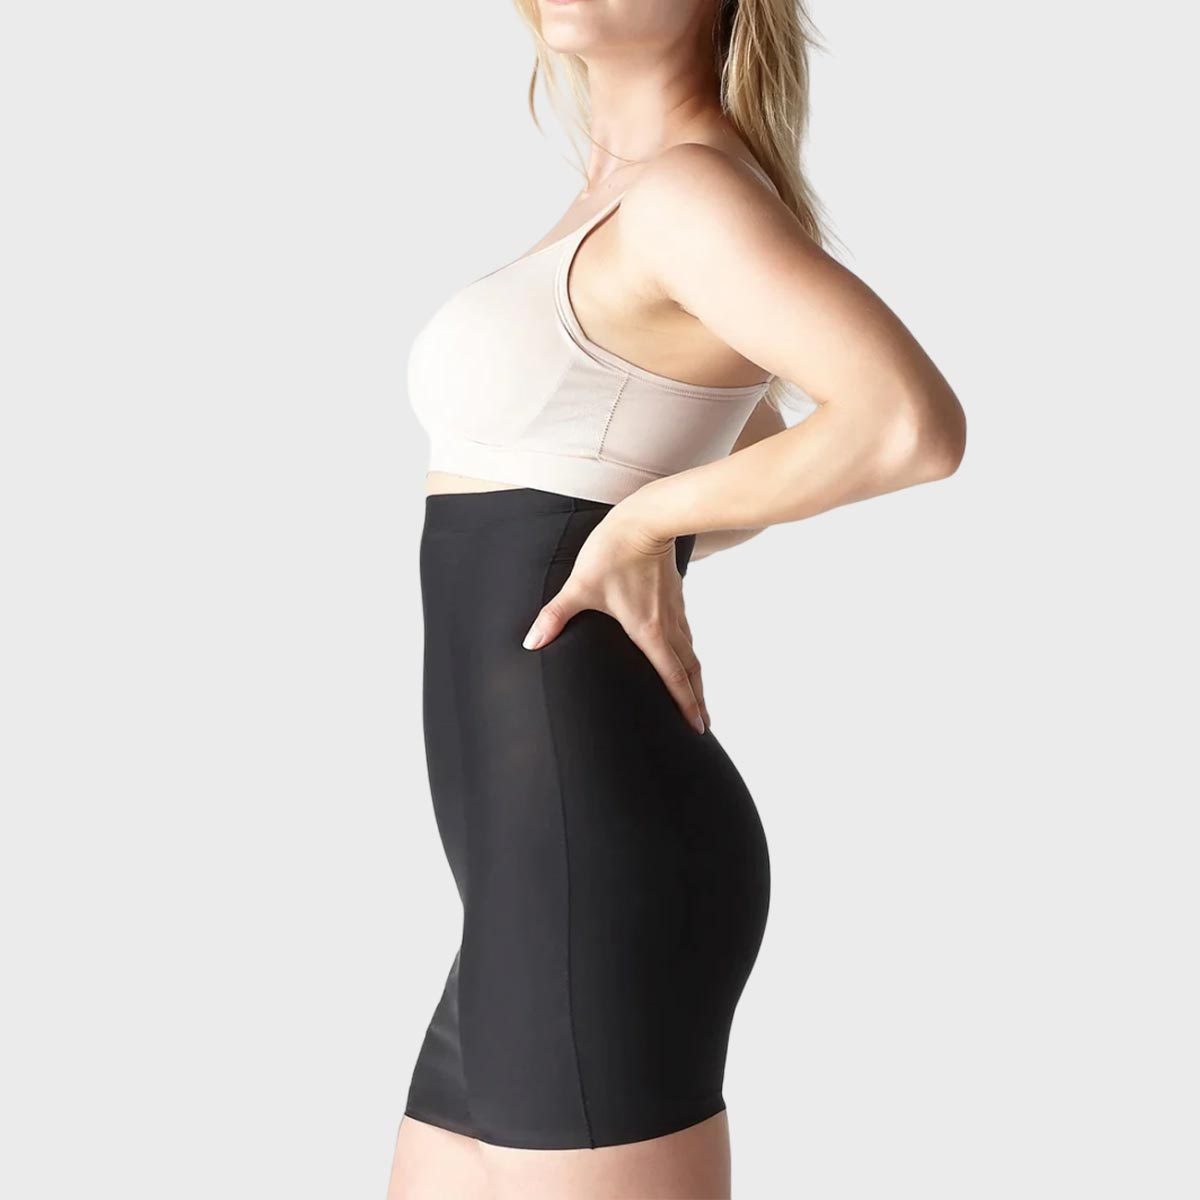 Hey all - I'm finding it impossible to find shapewear (for my